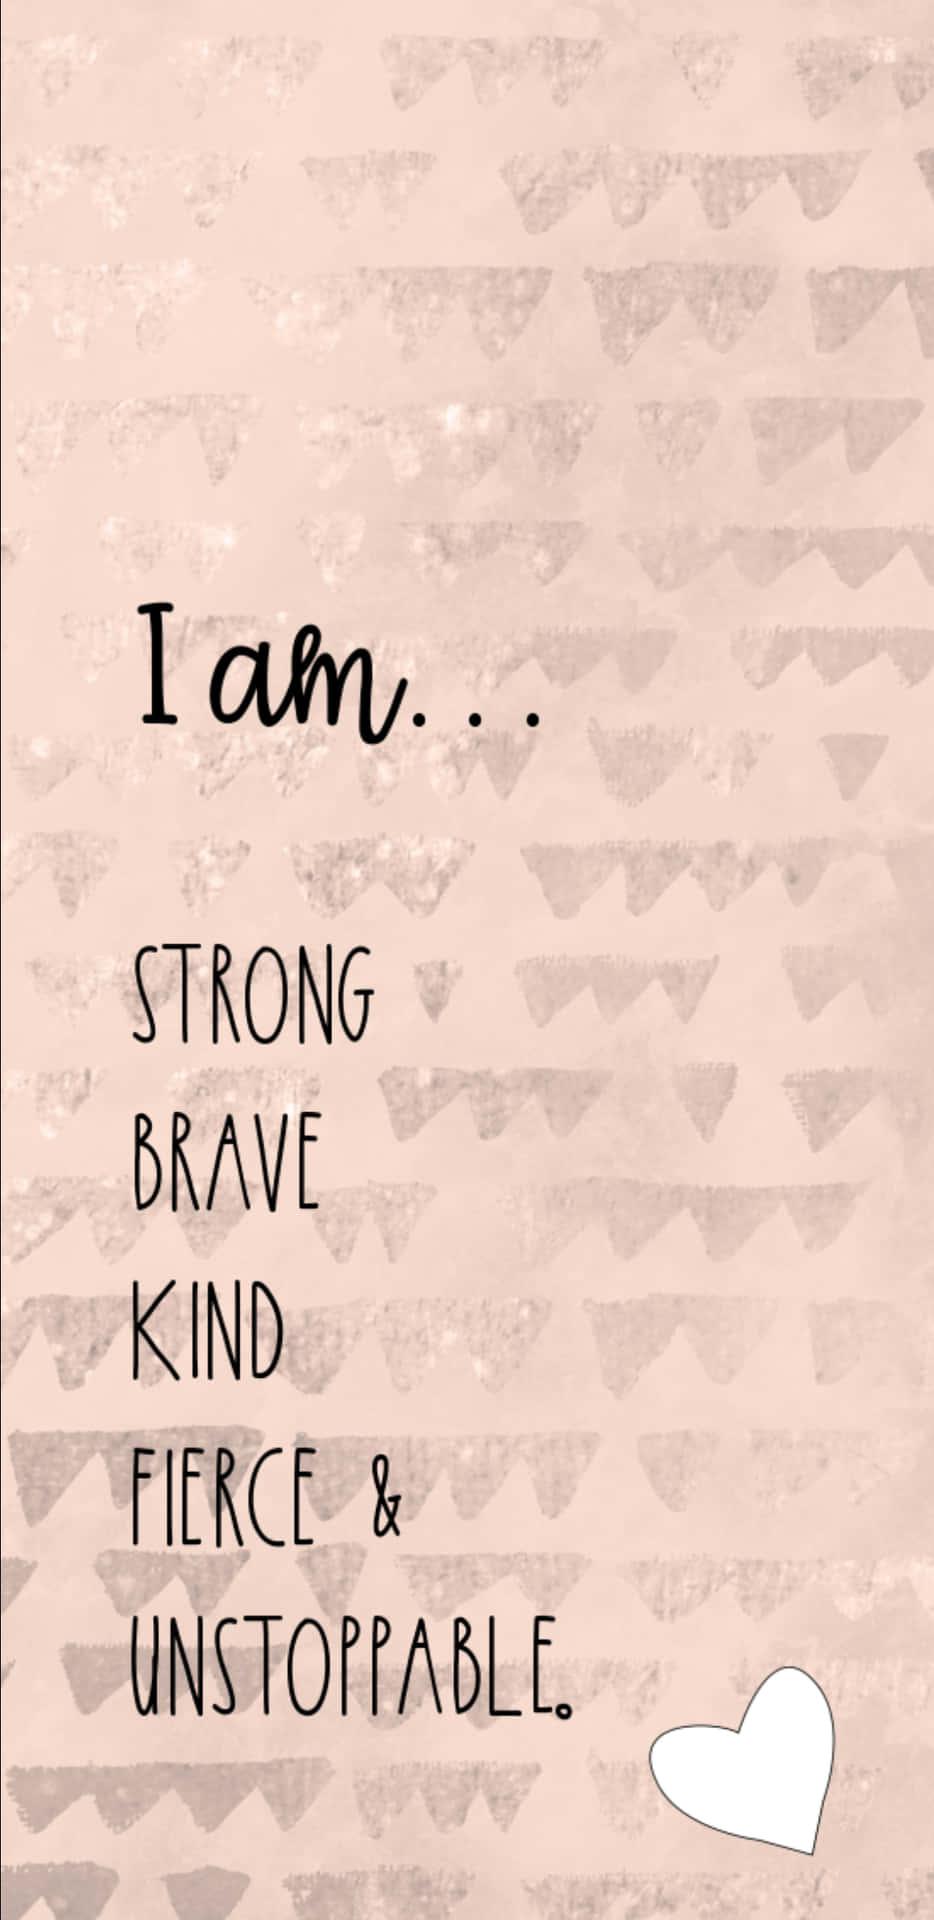 Inspiring and empowering affirmation background